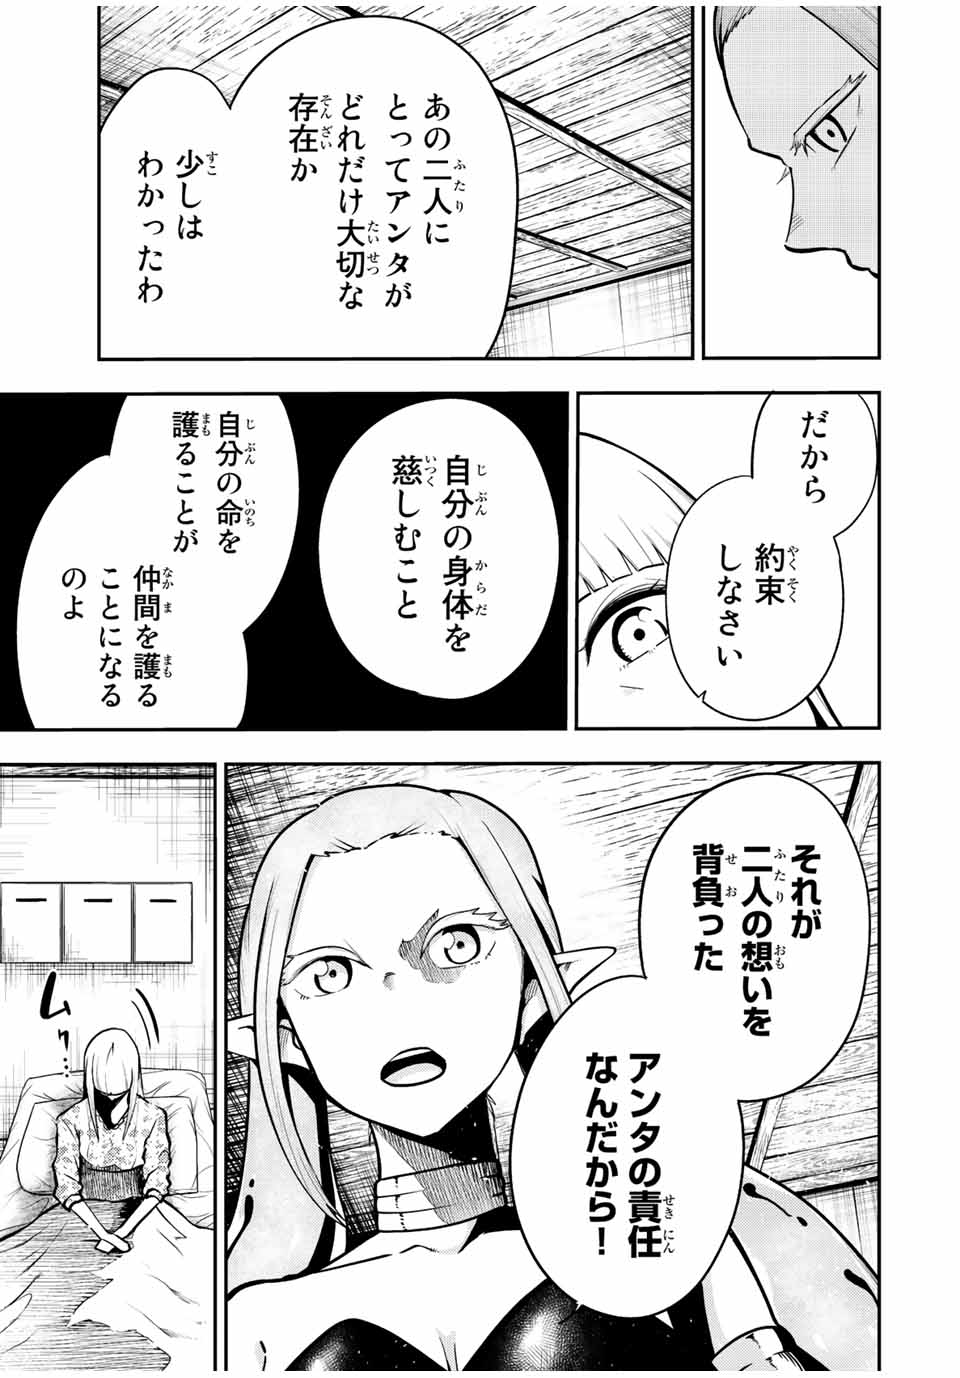 the strongest former prince-; 奴隷転生 ～その奴隷、最強の元王子につき～ 第78話 - Page 17